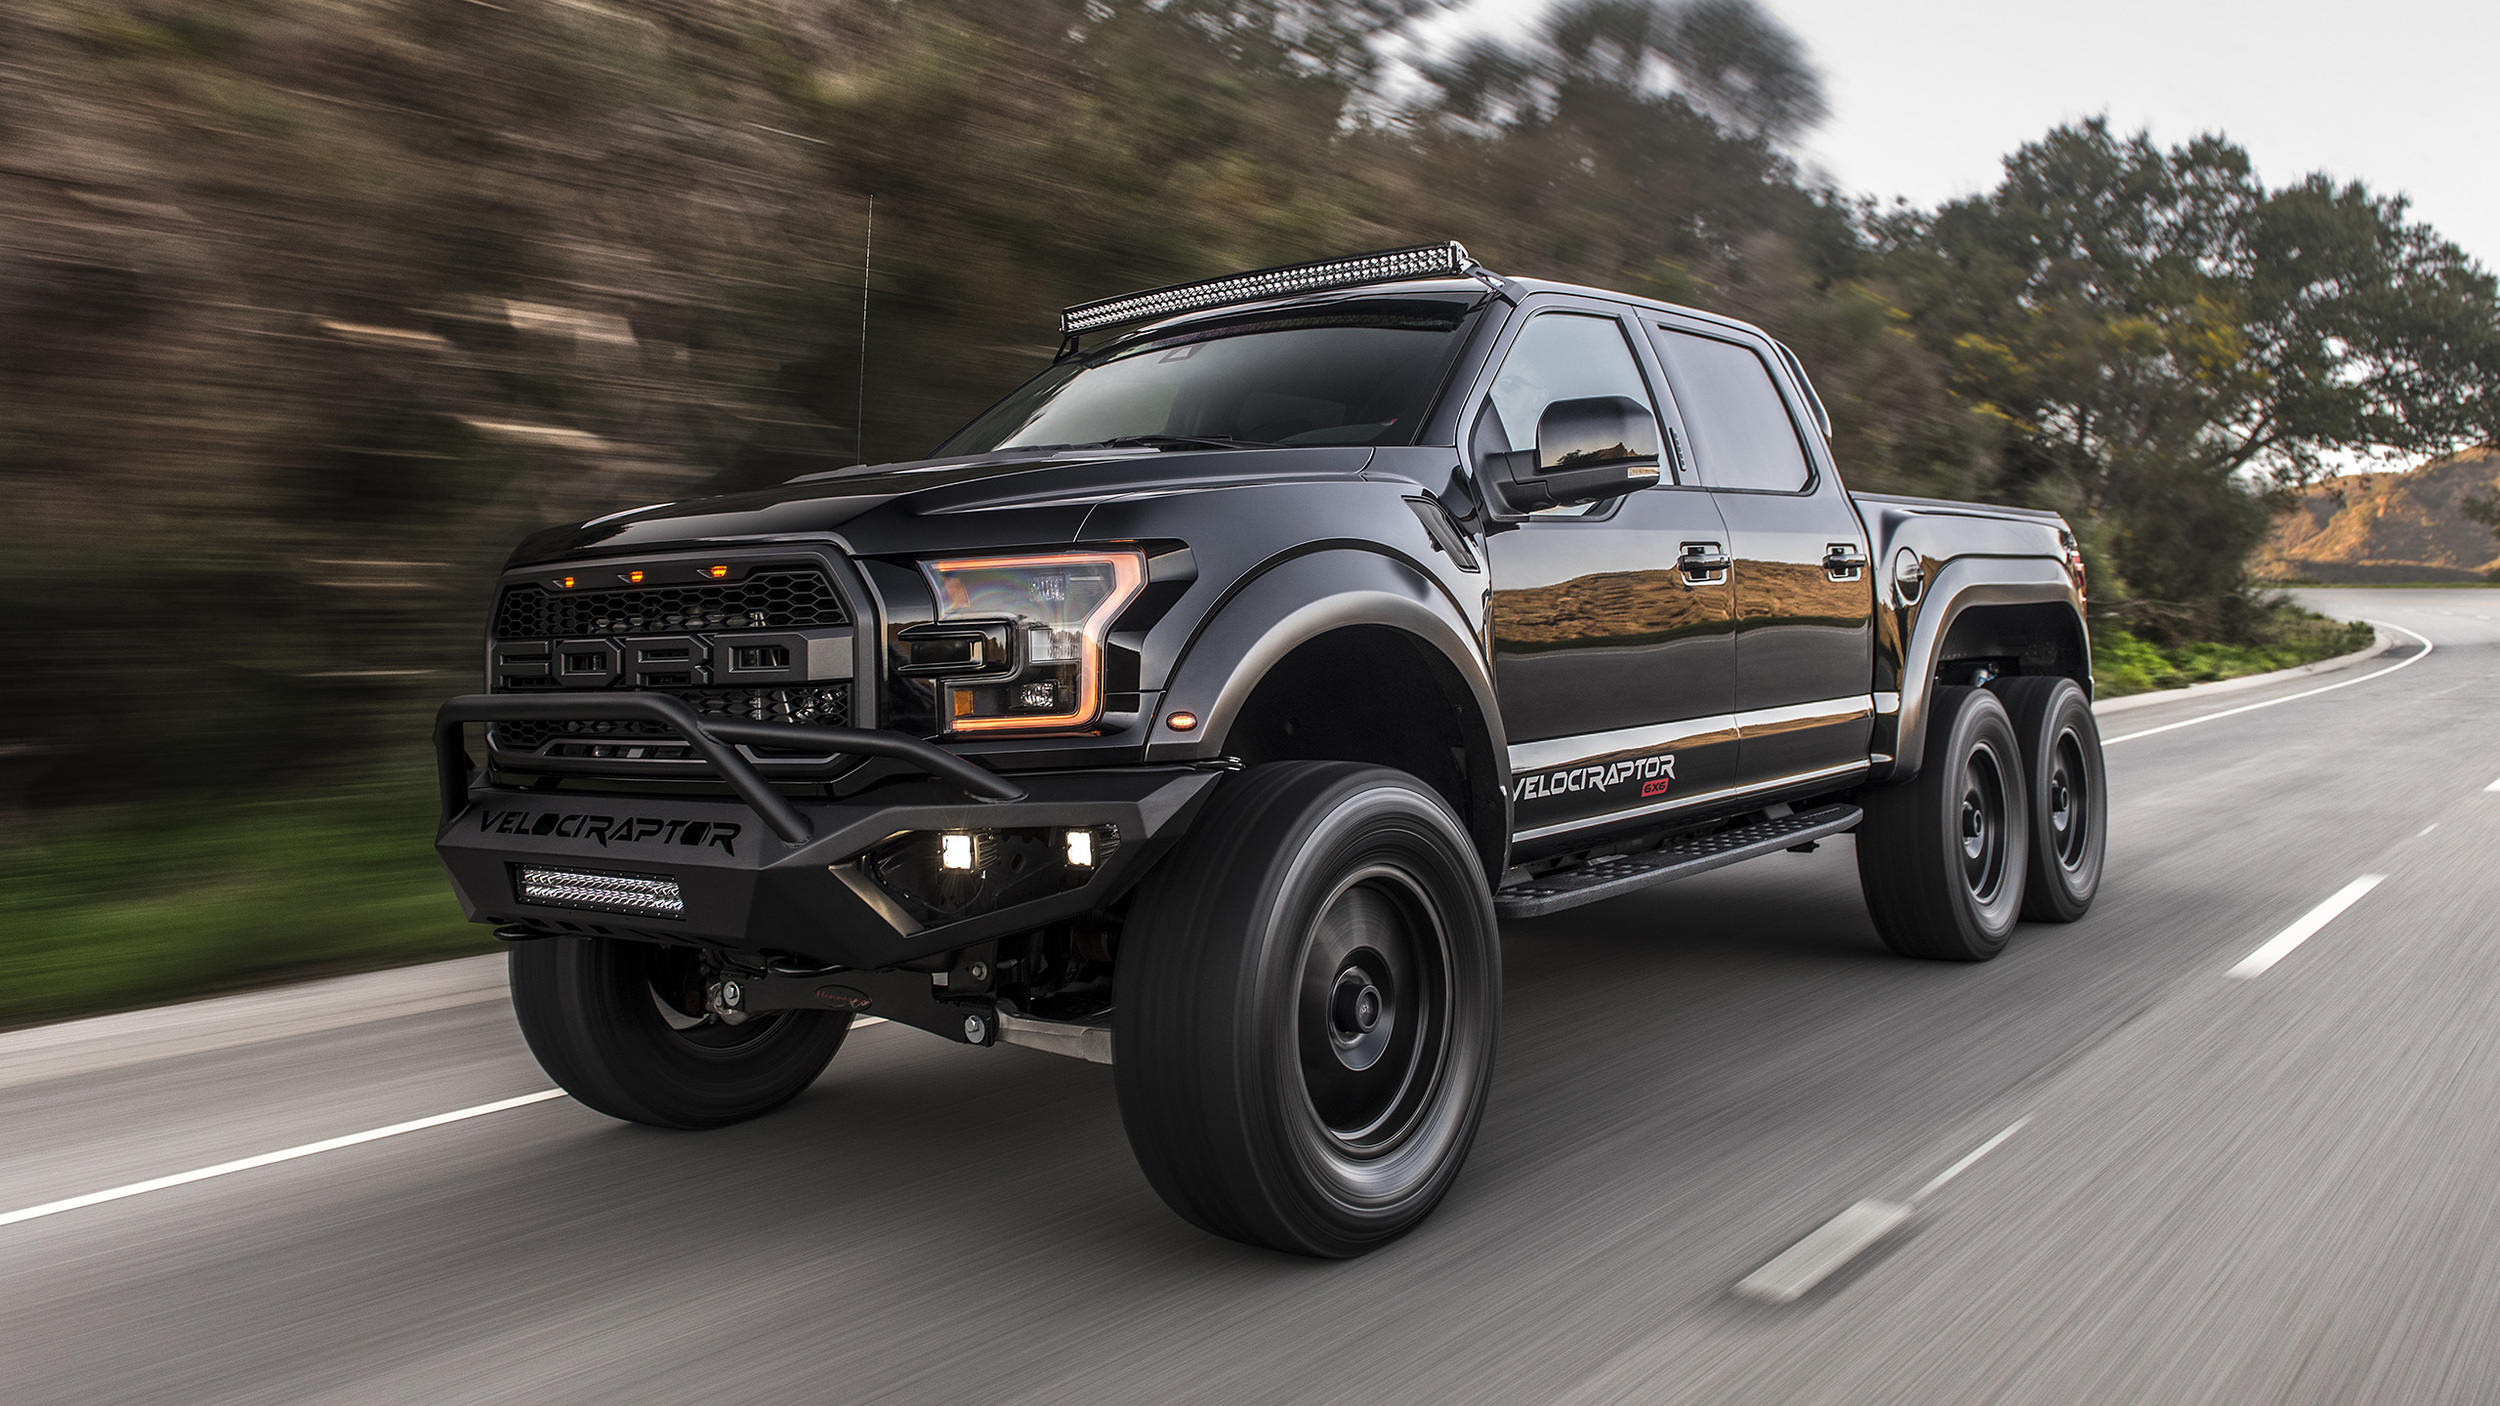 Hennessey VelociRaptor 6x6 modified Ford F-150 road test review - Autoblog